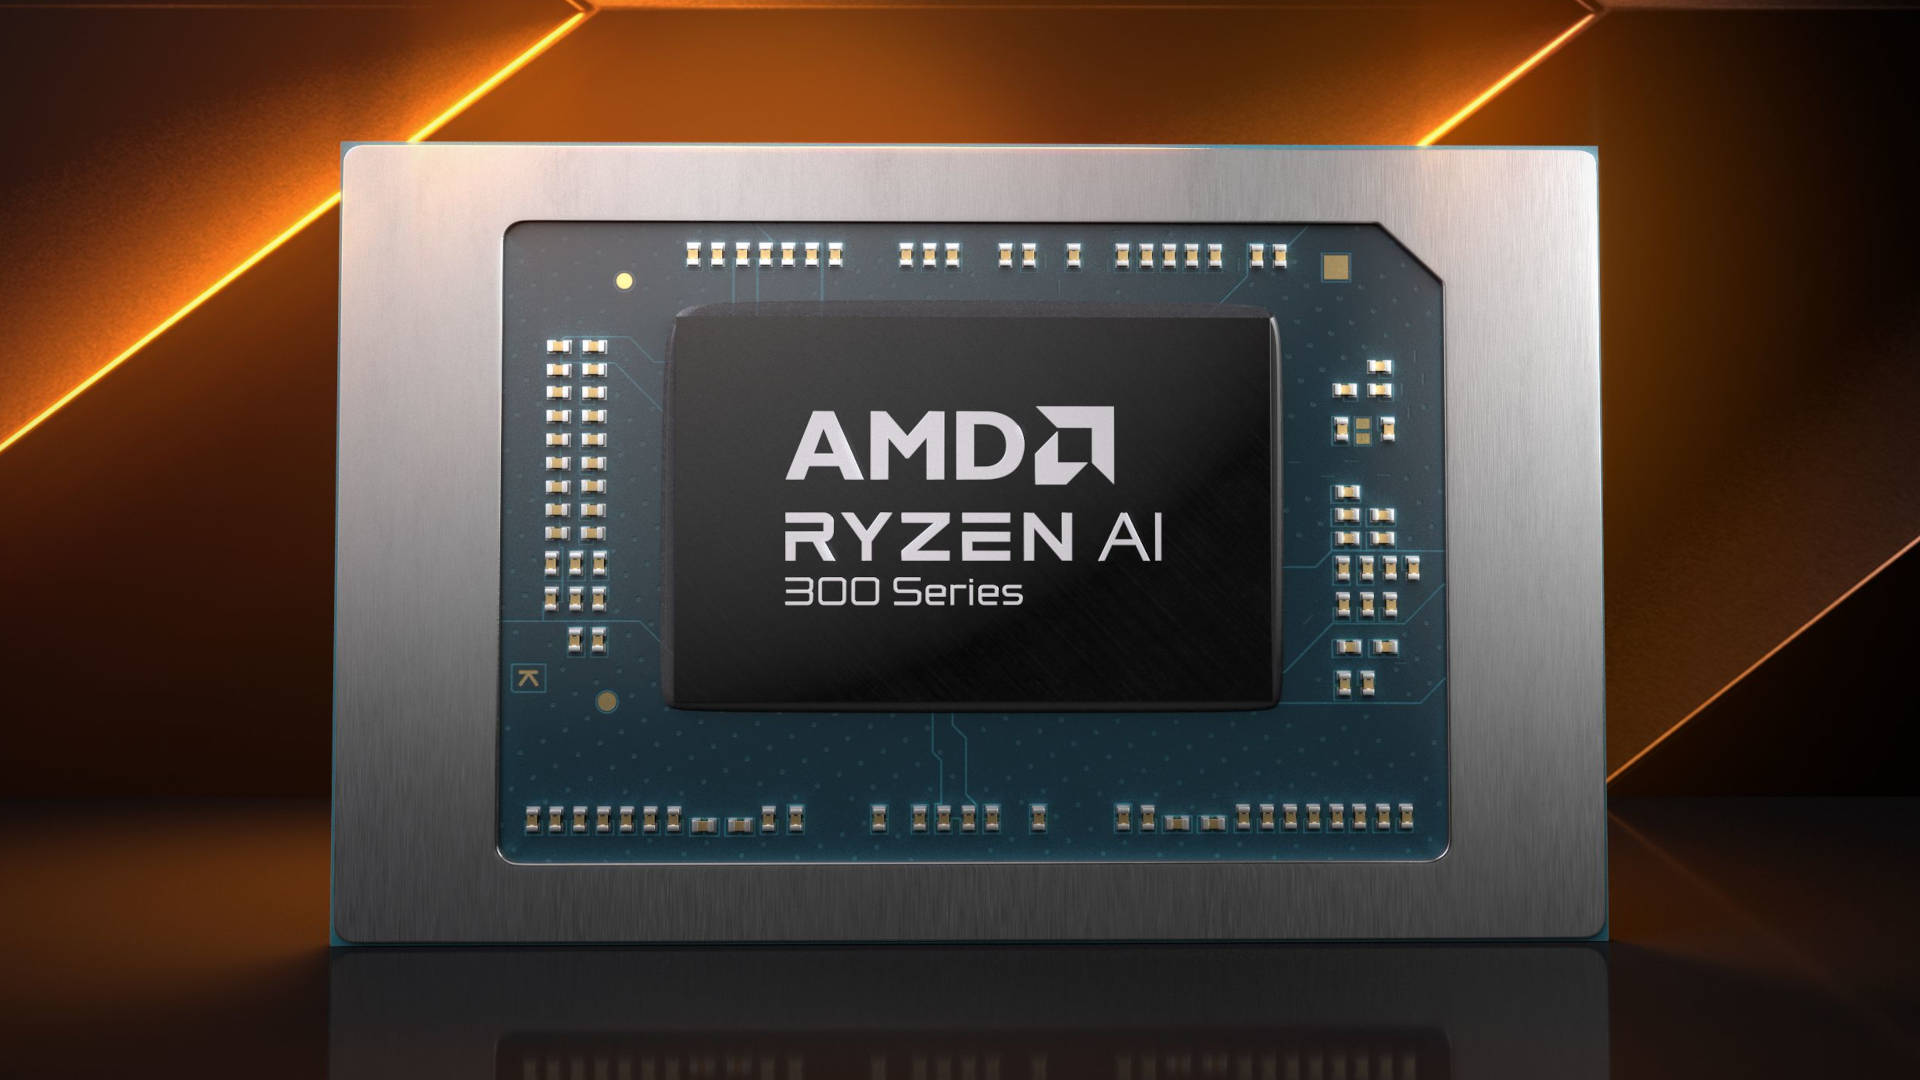 AMD’s new Ryzen AI laptop chips aren’t officially supported on Windows 10, thanks to its NPU and Copilot+